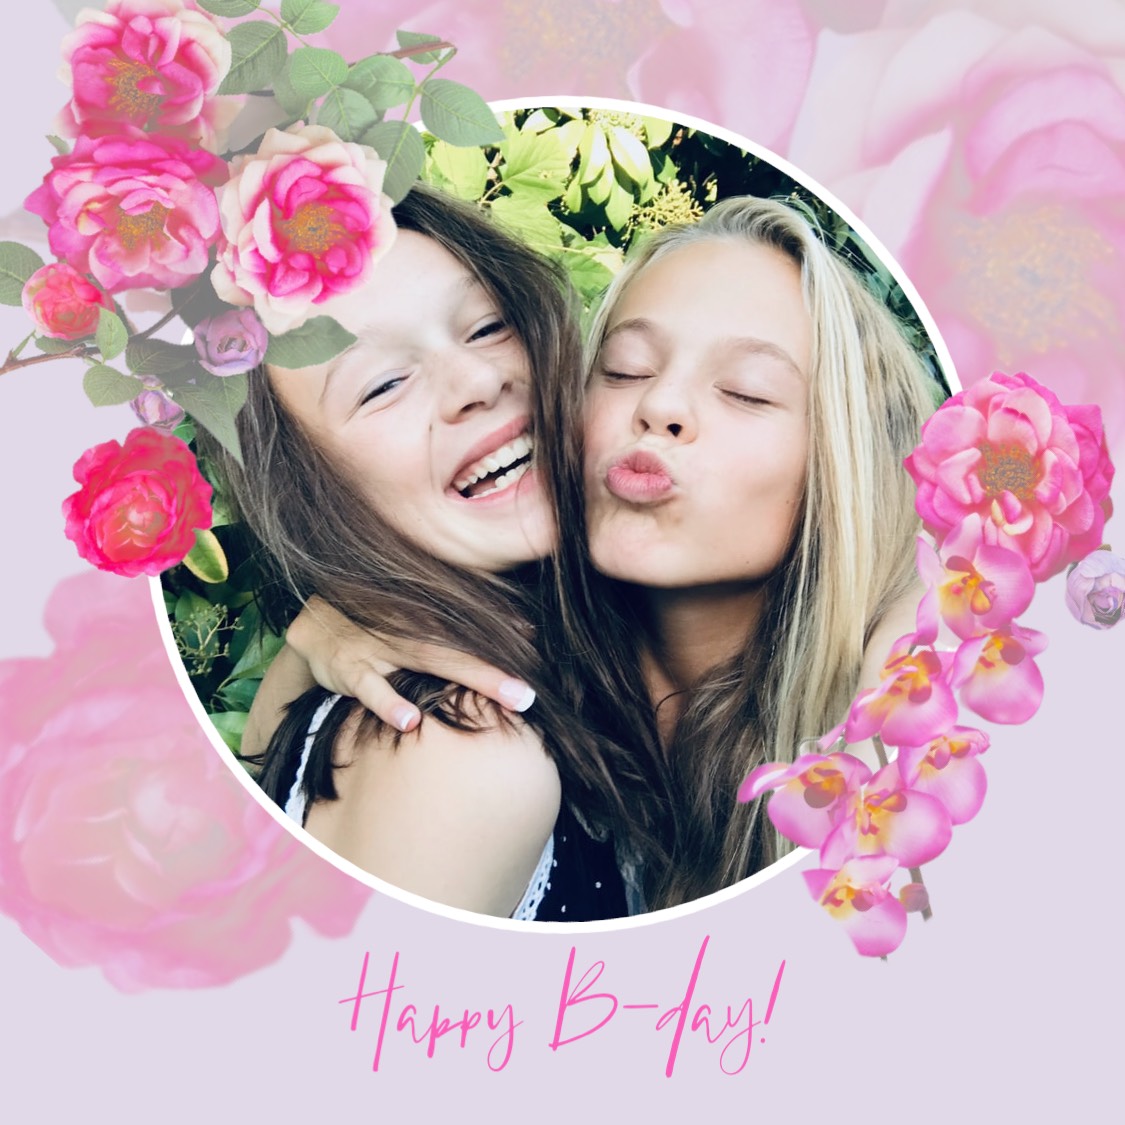 Two girls smiling happy b-day with pink flowers Facebook post template